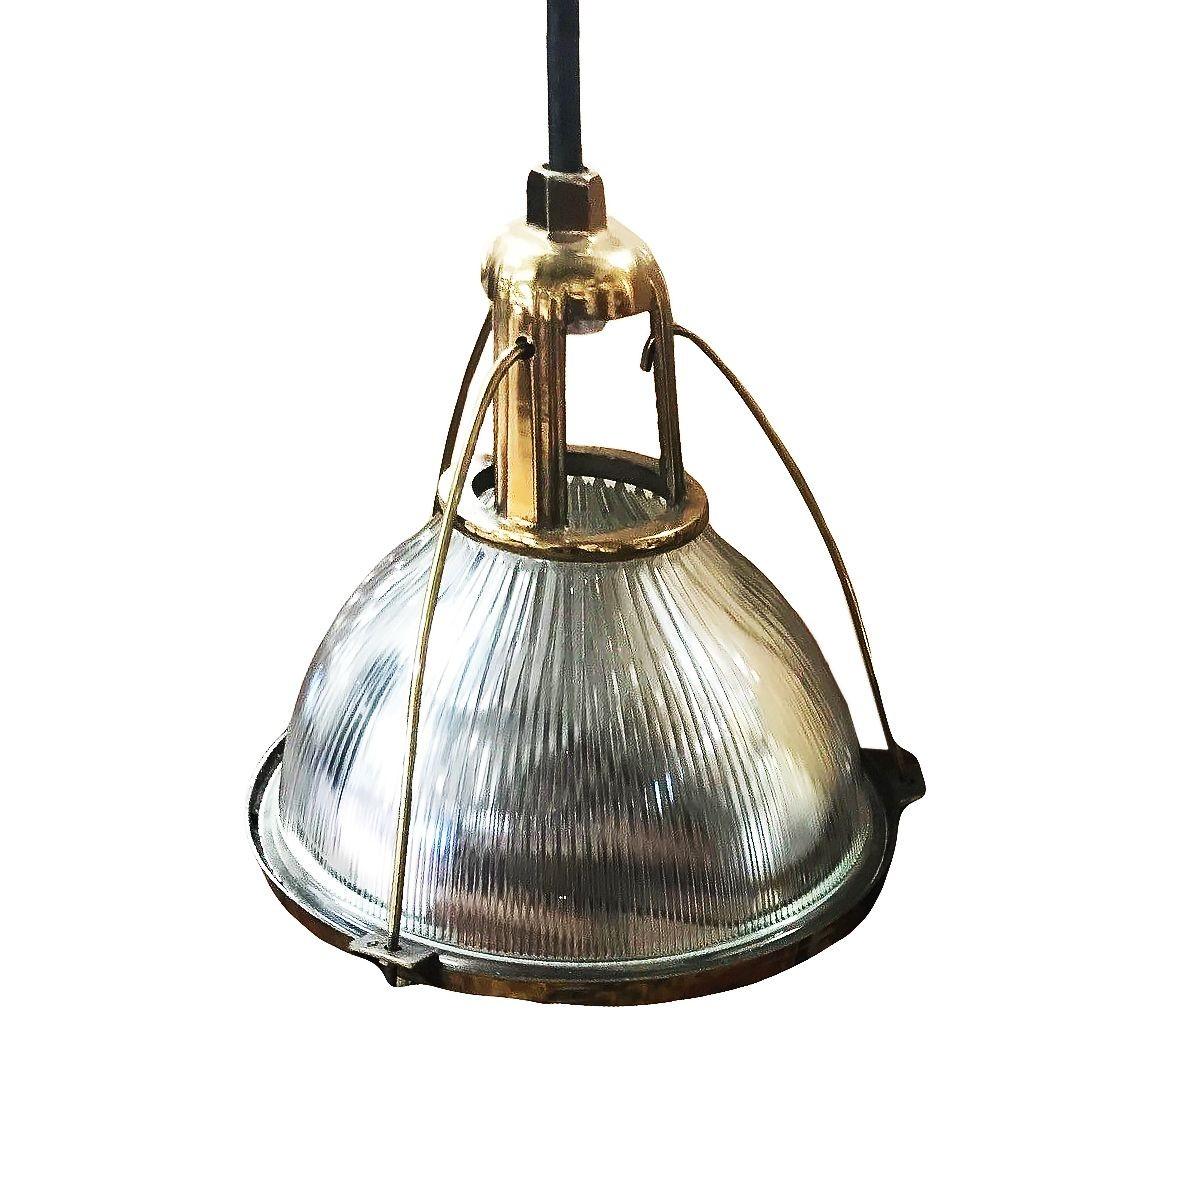 This industrial yet elegant hanging lamp from the 1940s features a Holophane glass shade. These pendant lights are connected by an aluminum casing fixed to the top of the light fixture and are a rare brass-plated variant not seen often.

A holophane